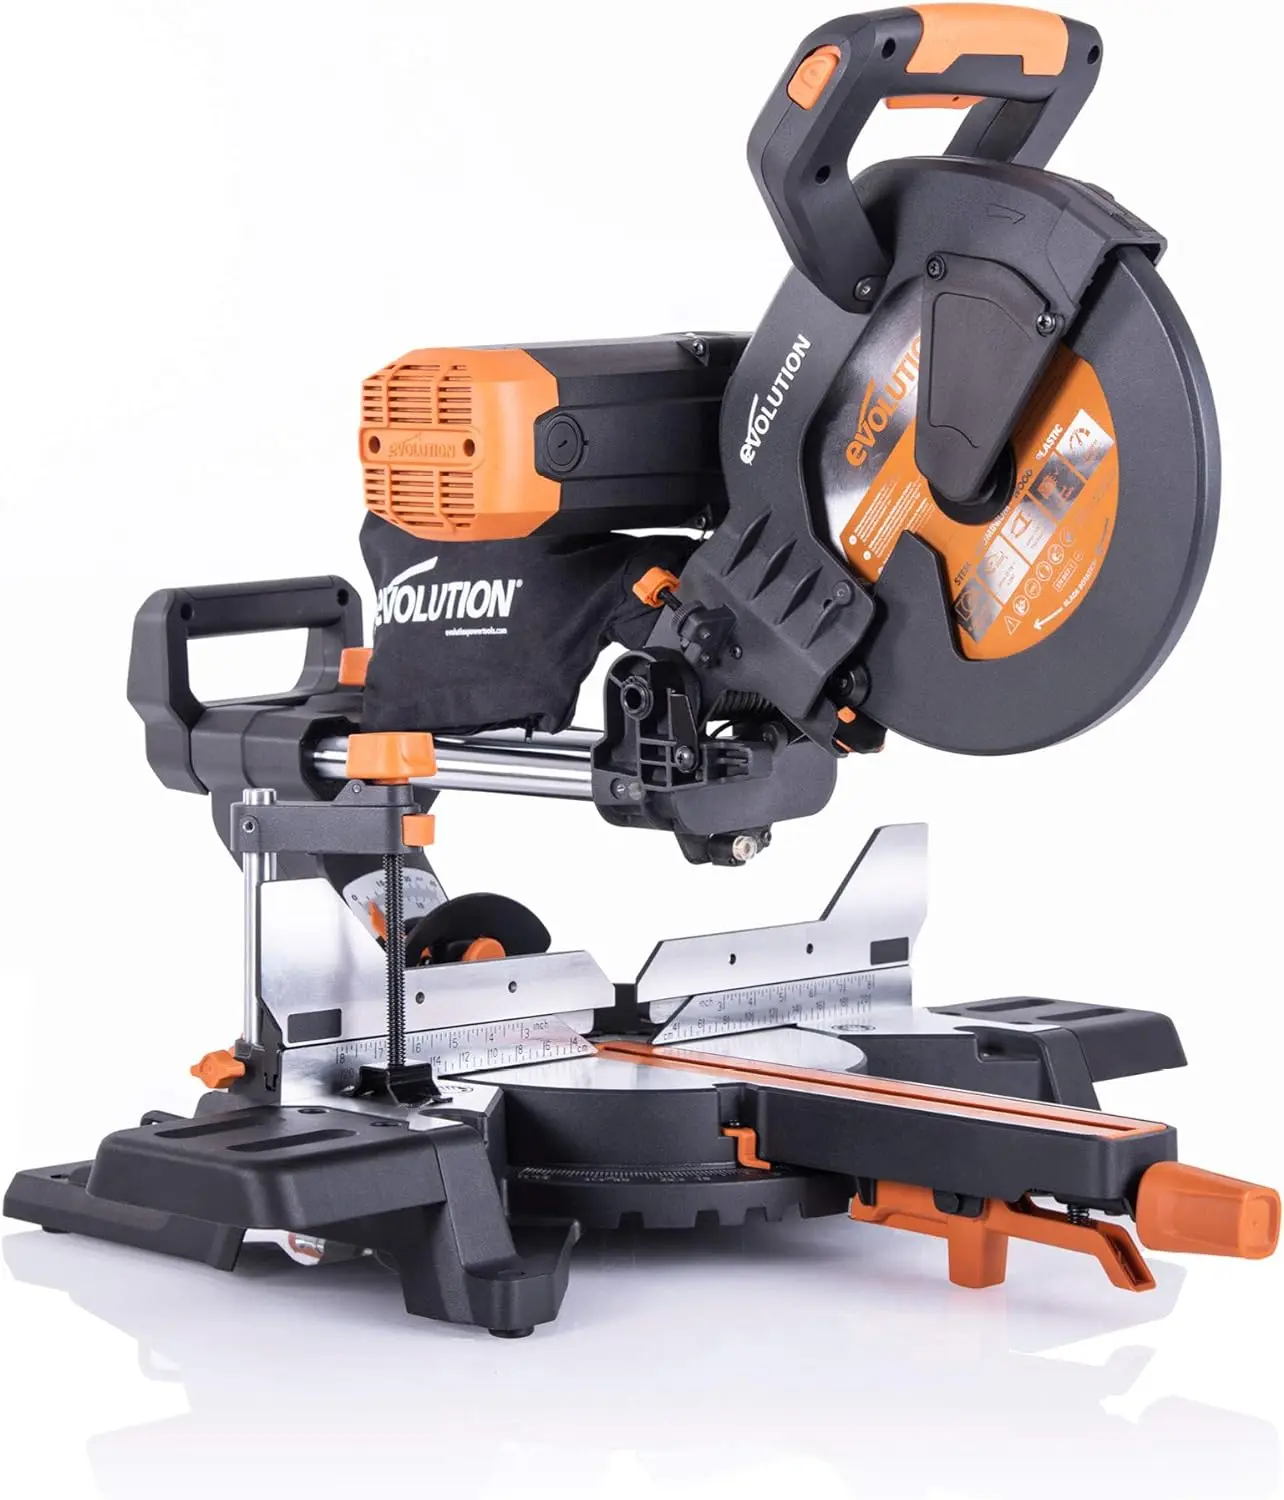 

Evolution Power Tools R255SMS-DB+ 10-Inch Dual Bevel Sliding Miter Saw Multi-Material, Multipurpose Cutting Cuts Metal,